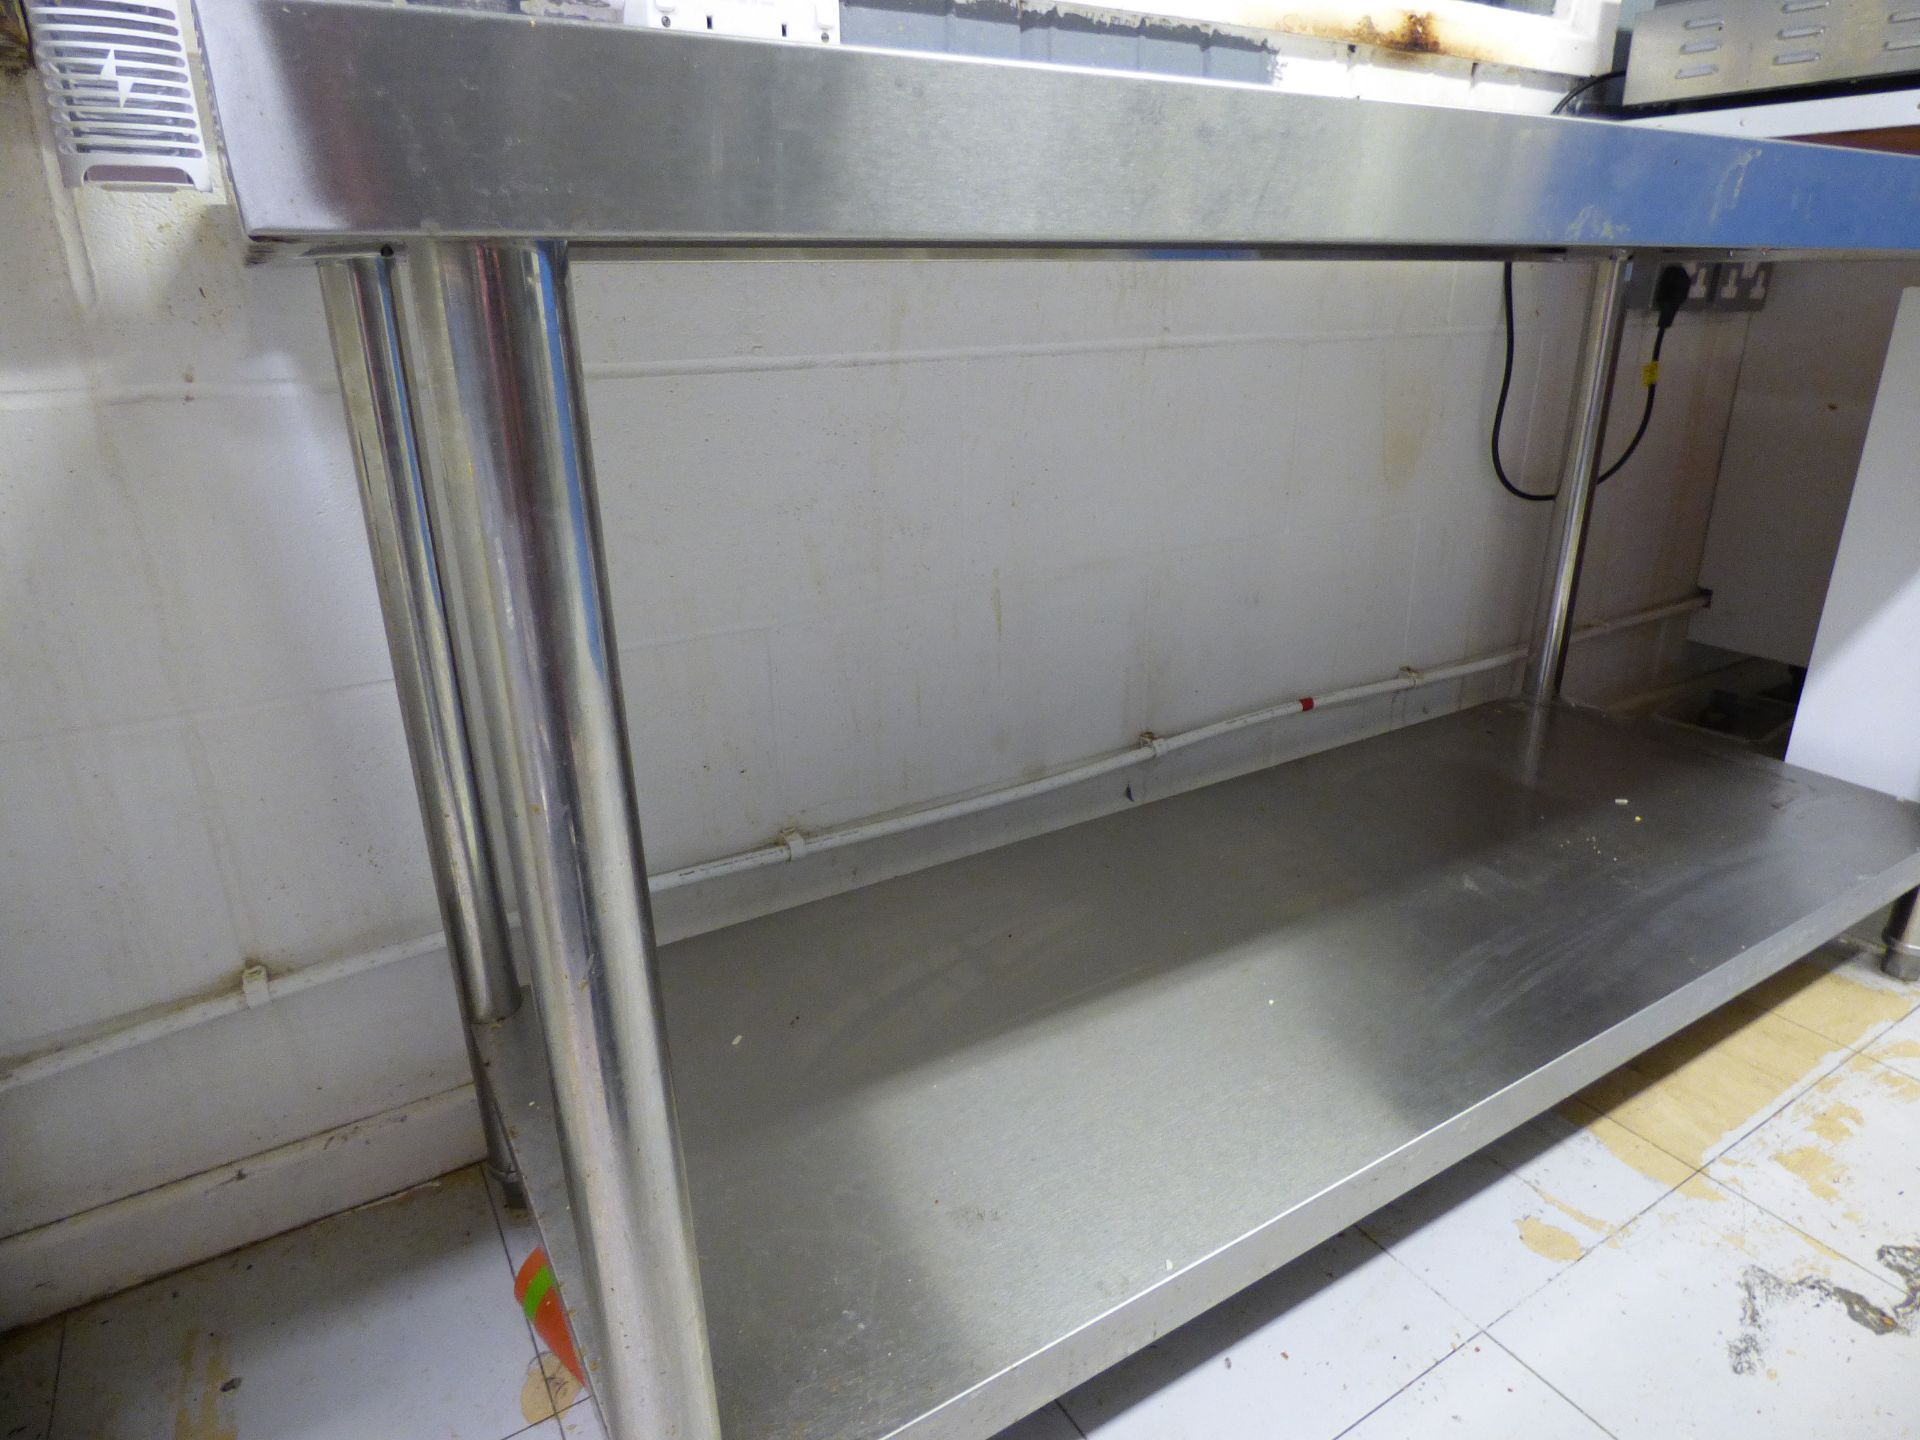 Stainless Steel Work Surface/Shelf Unit